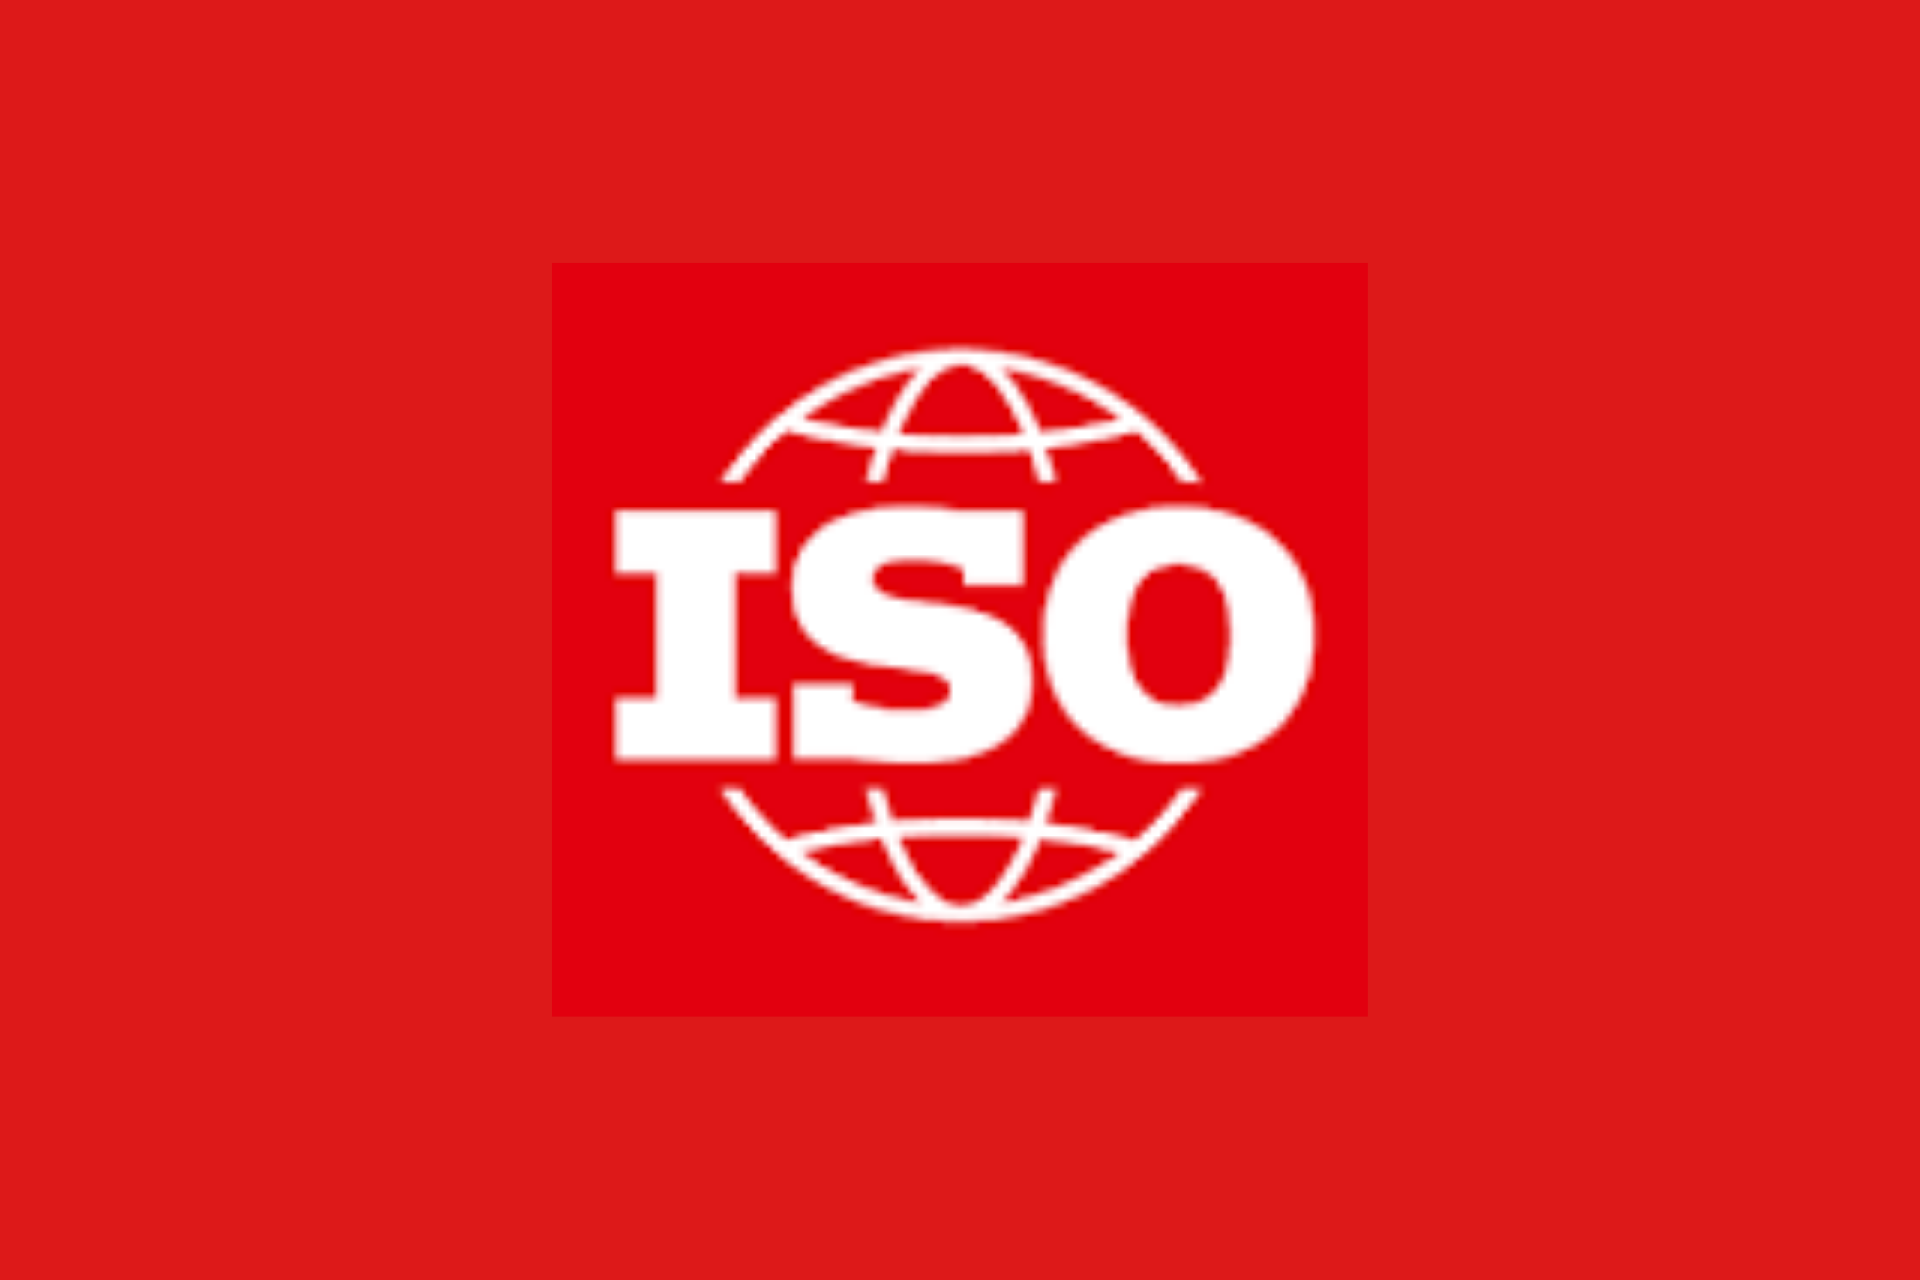 What is ISO Certification and why does it matter?